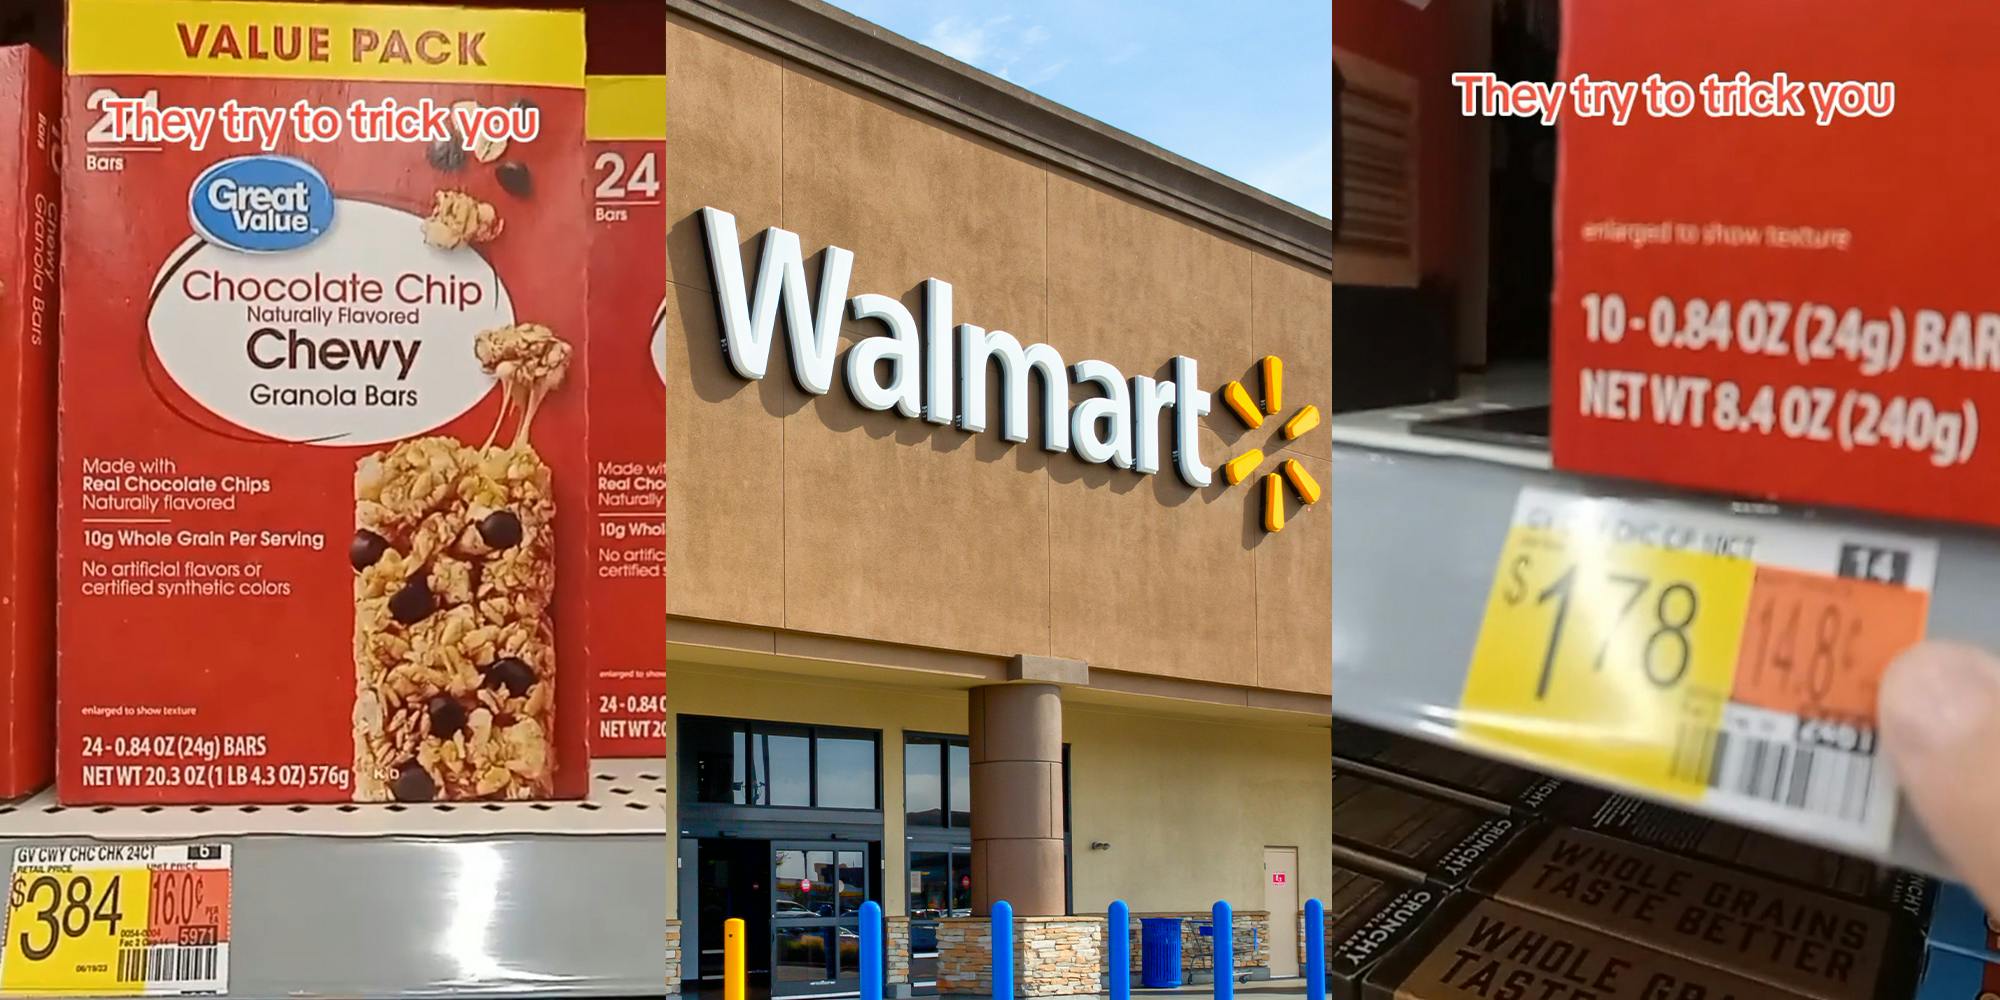 Walmart customer shows how ‘value pack’ of items aren’t always the best deal